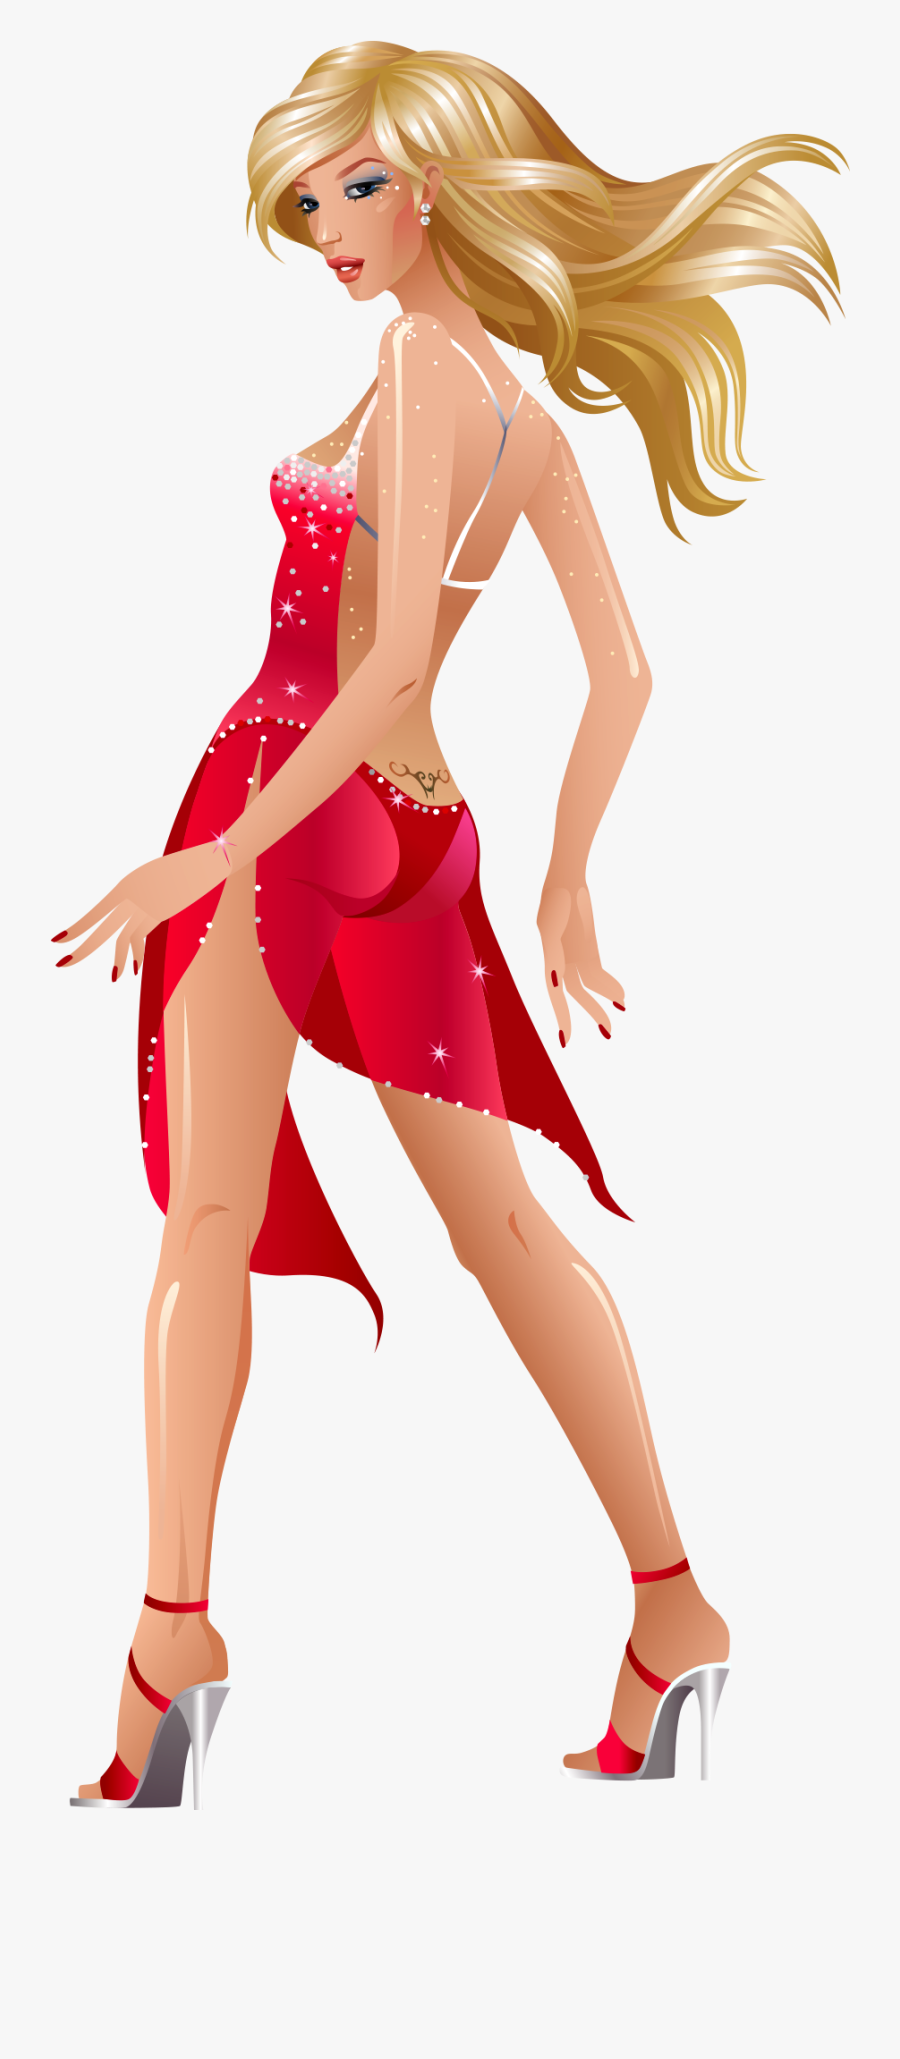 Hd Woman On The Floor Png Image Free Download - Sexy Cartoon Girl Mini Dress, Transparent Clipart